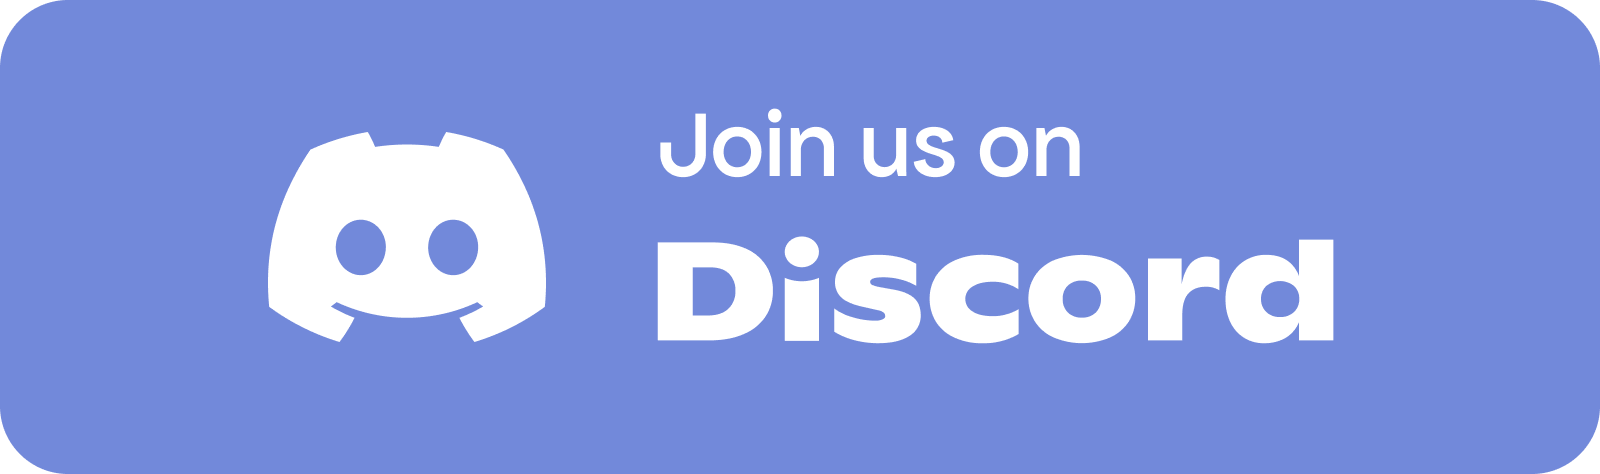 join us on discord